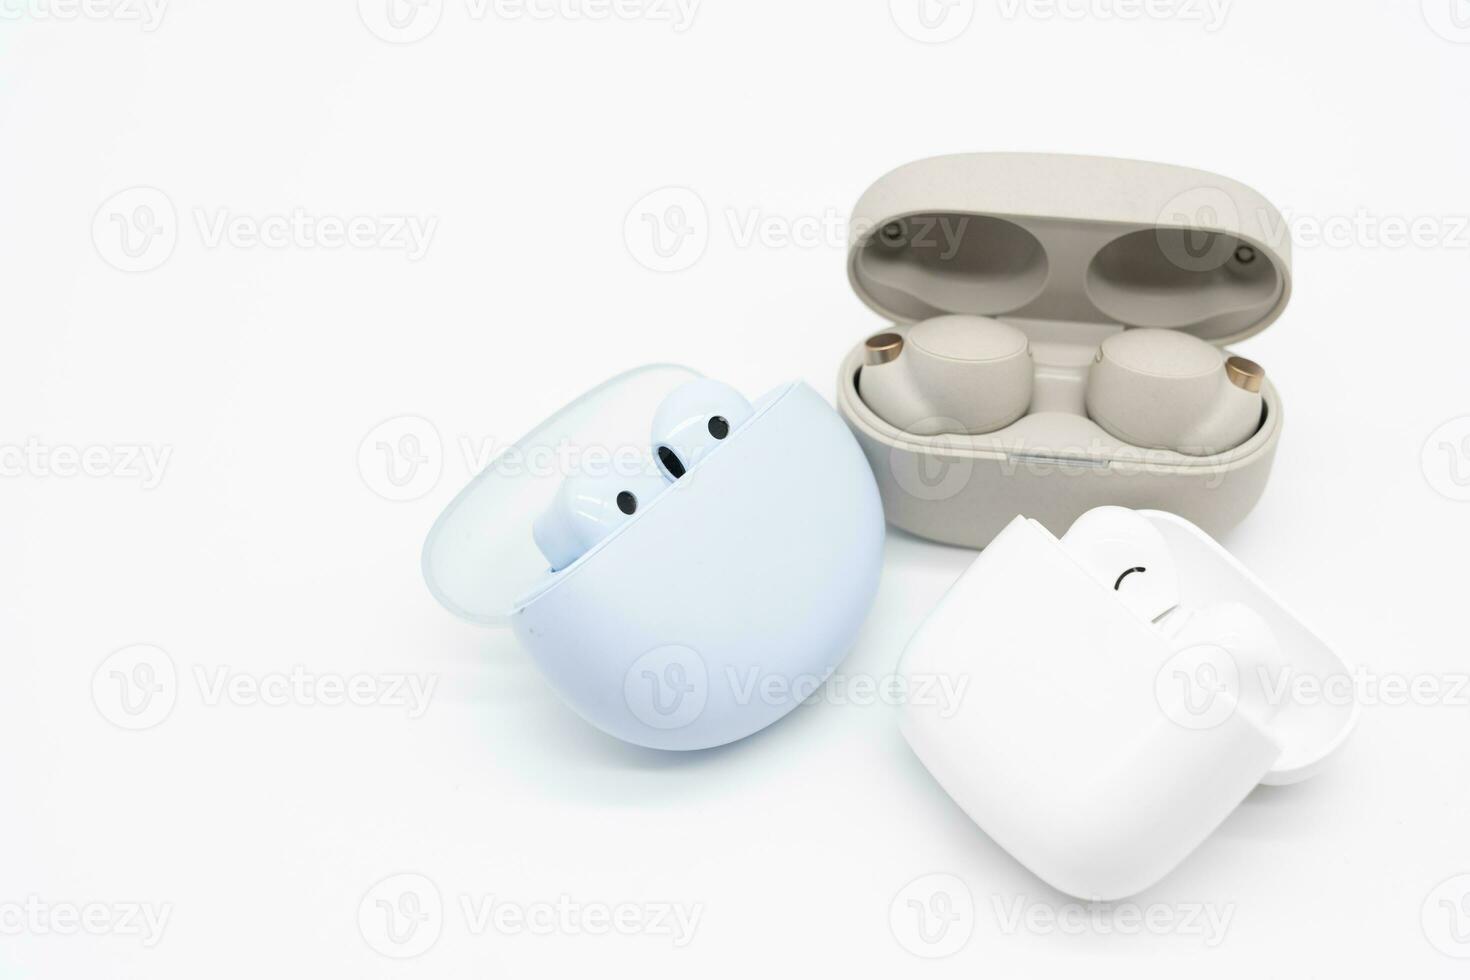 Different types of Truly wireless earphones with charging case. photo